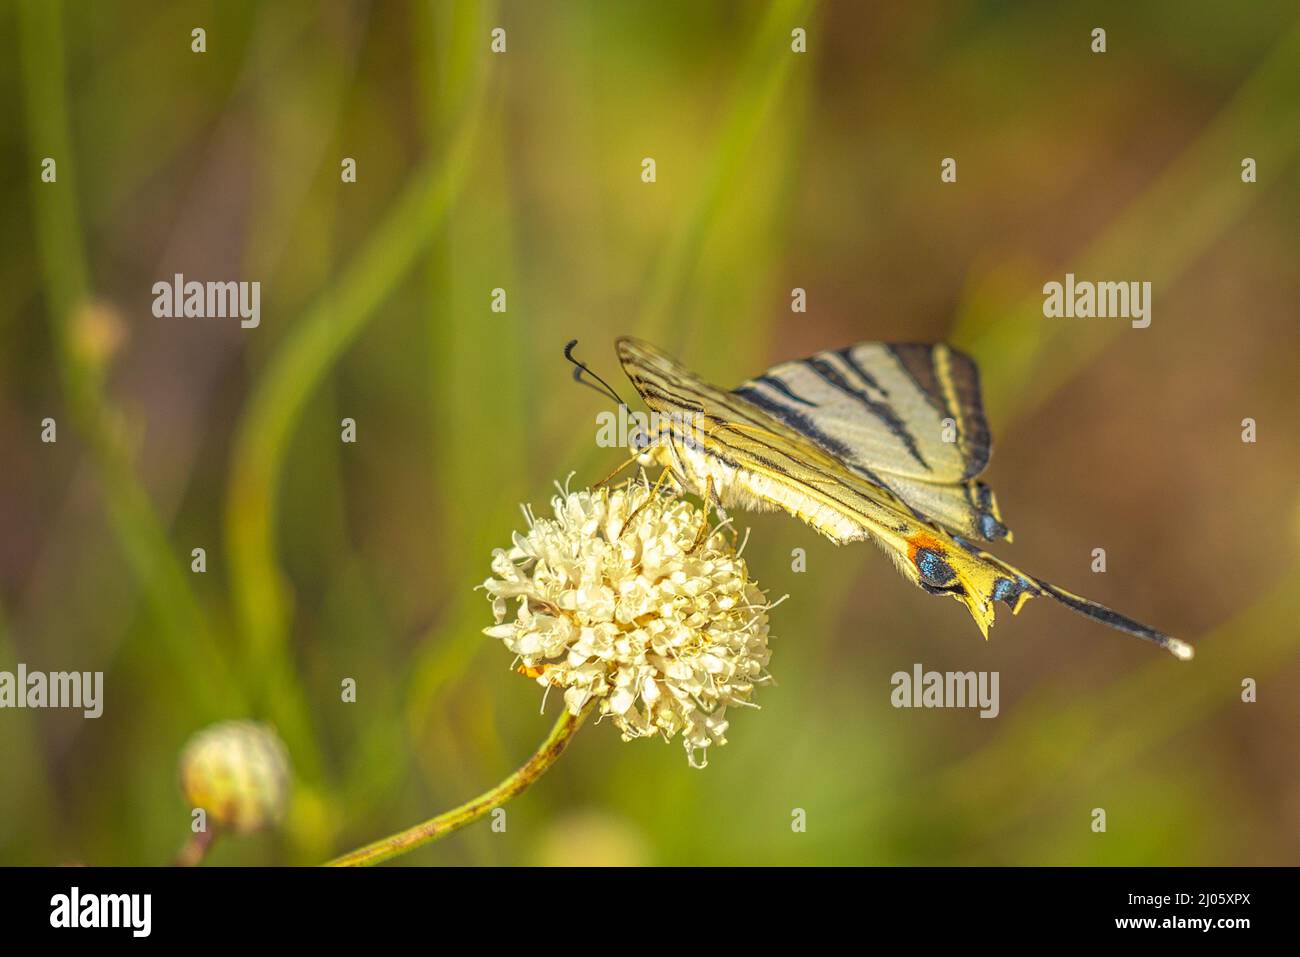 The butterfly known as the common yellow swallowtail in a closeup view. Stock Photo